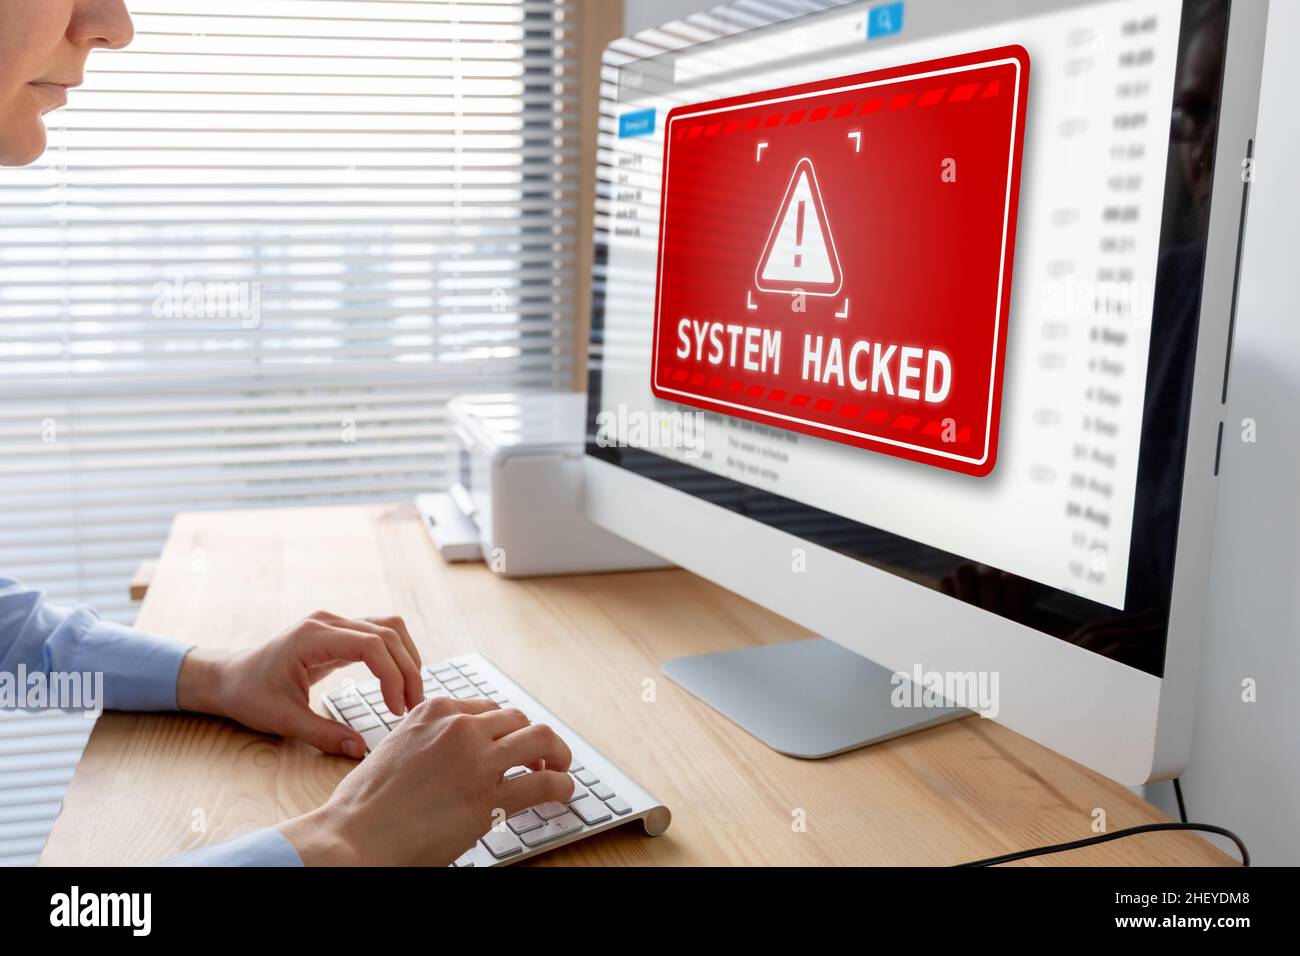 System hacked alert after cyber attack on computer network. Cybersecurity vulnerability on internet, virus, data breach, malicious connection. Employe Stock Photo